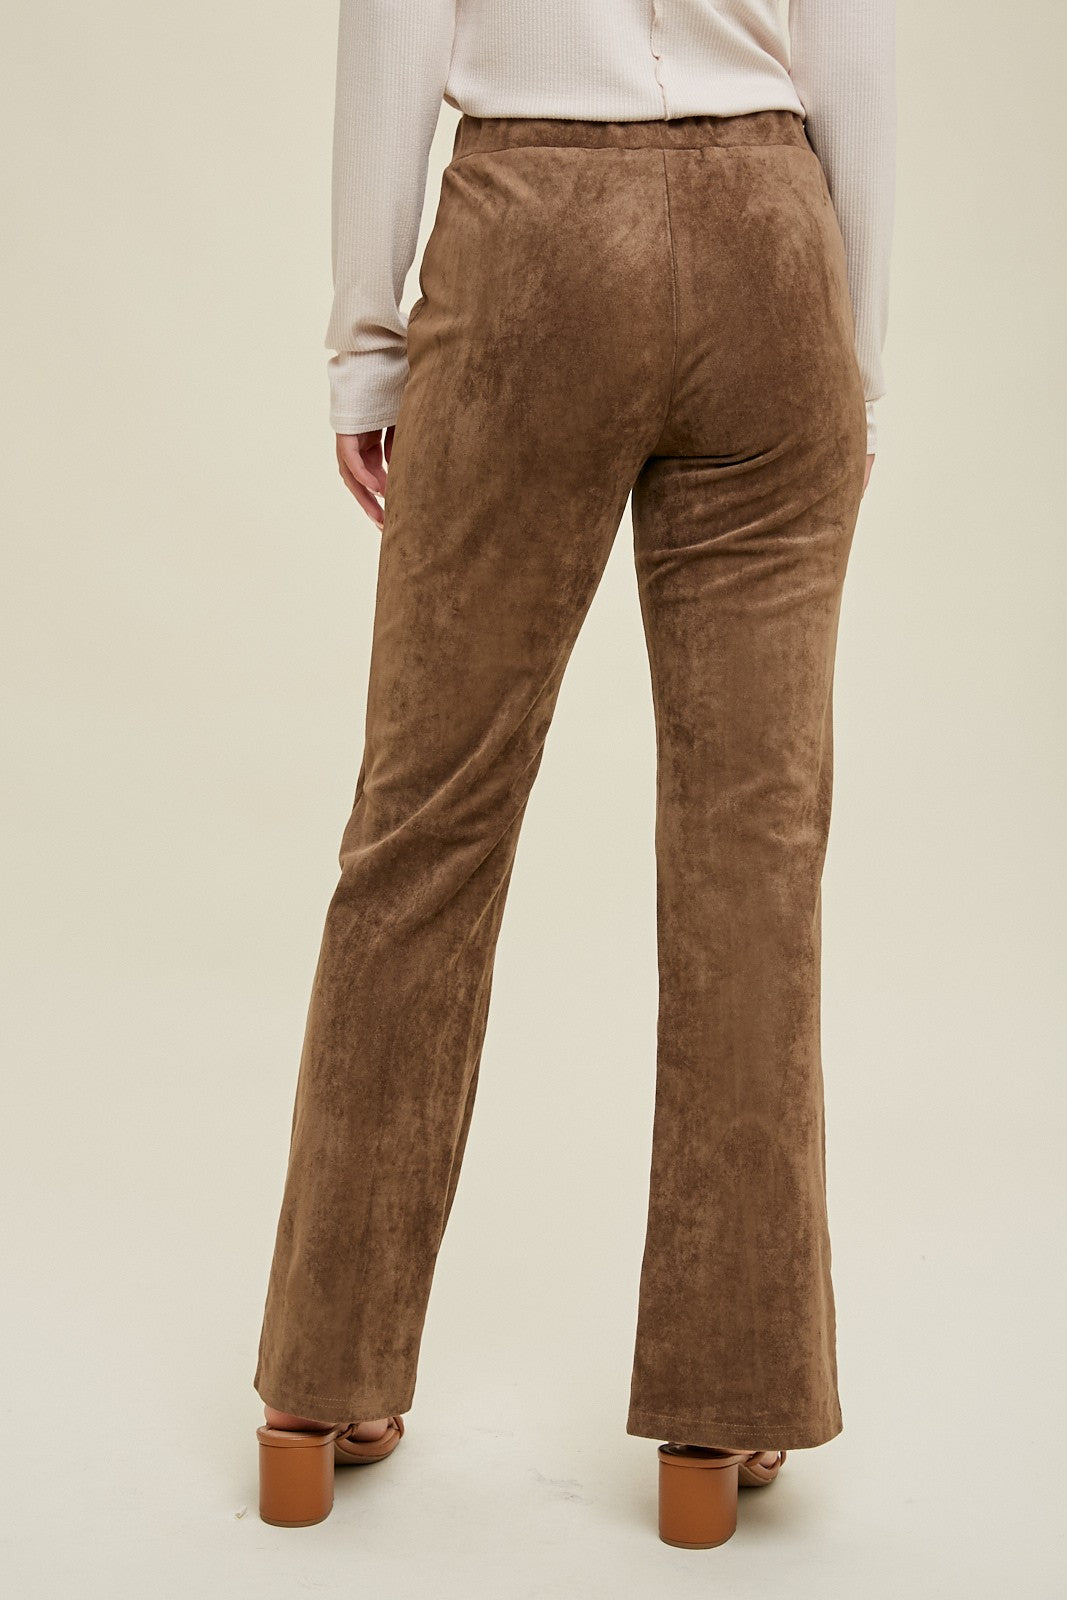 Mocha Suede Pants With Front Slit Detail– PinkBlush